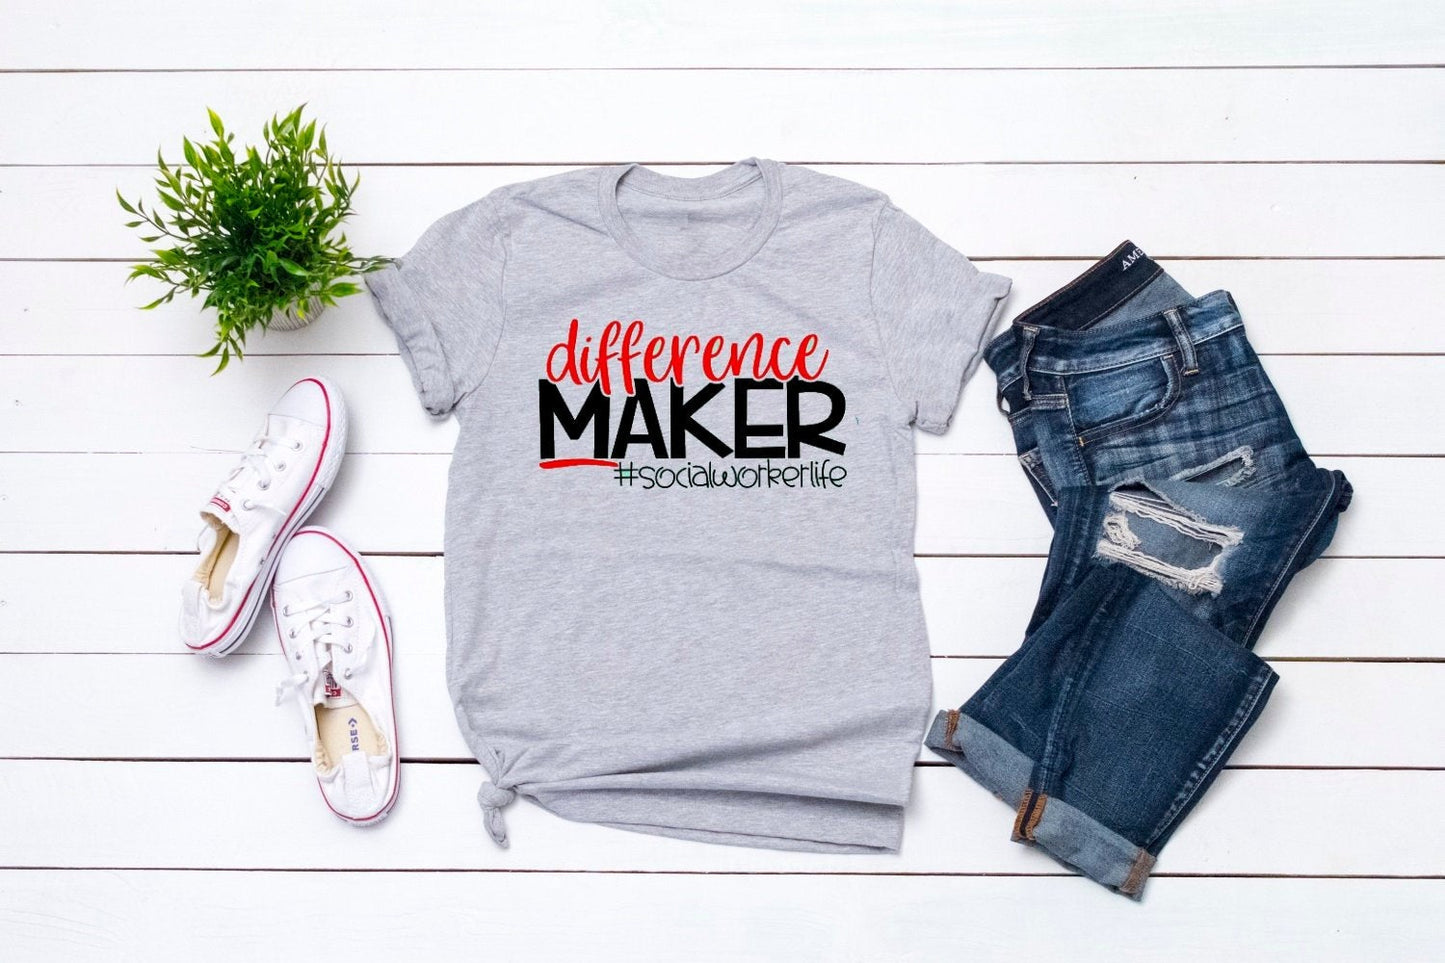 Difference Maker Social Worker Life Inspirational Unisex Grey Graphic Tee T-Shirt